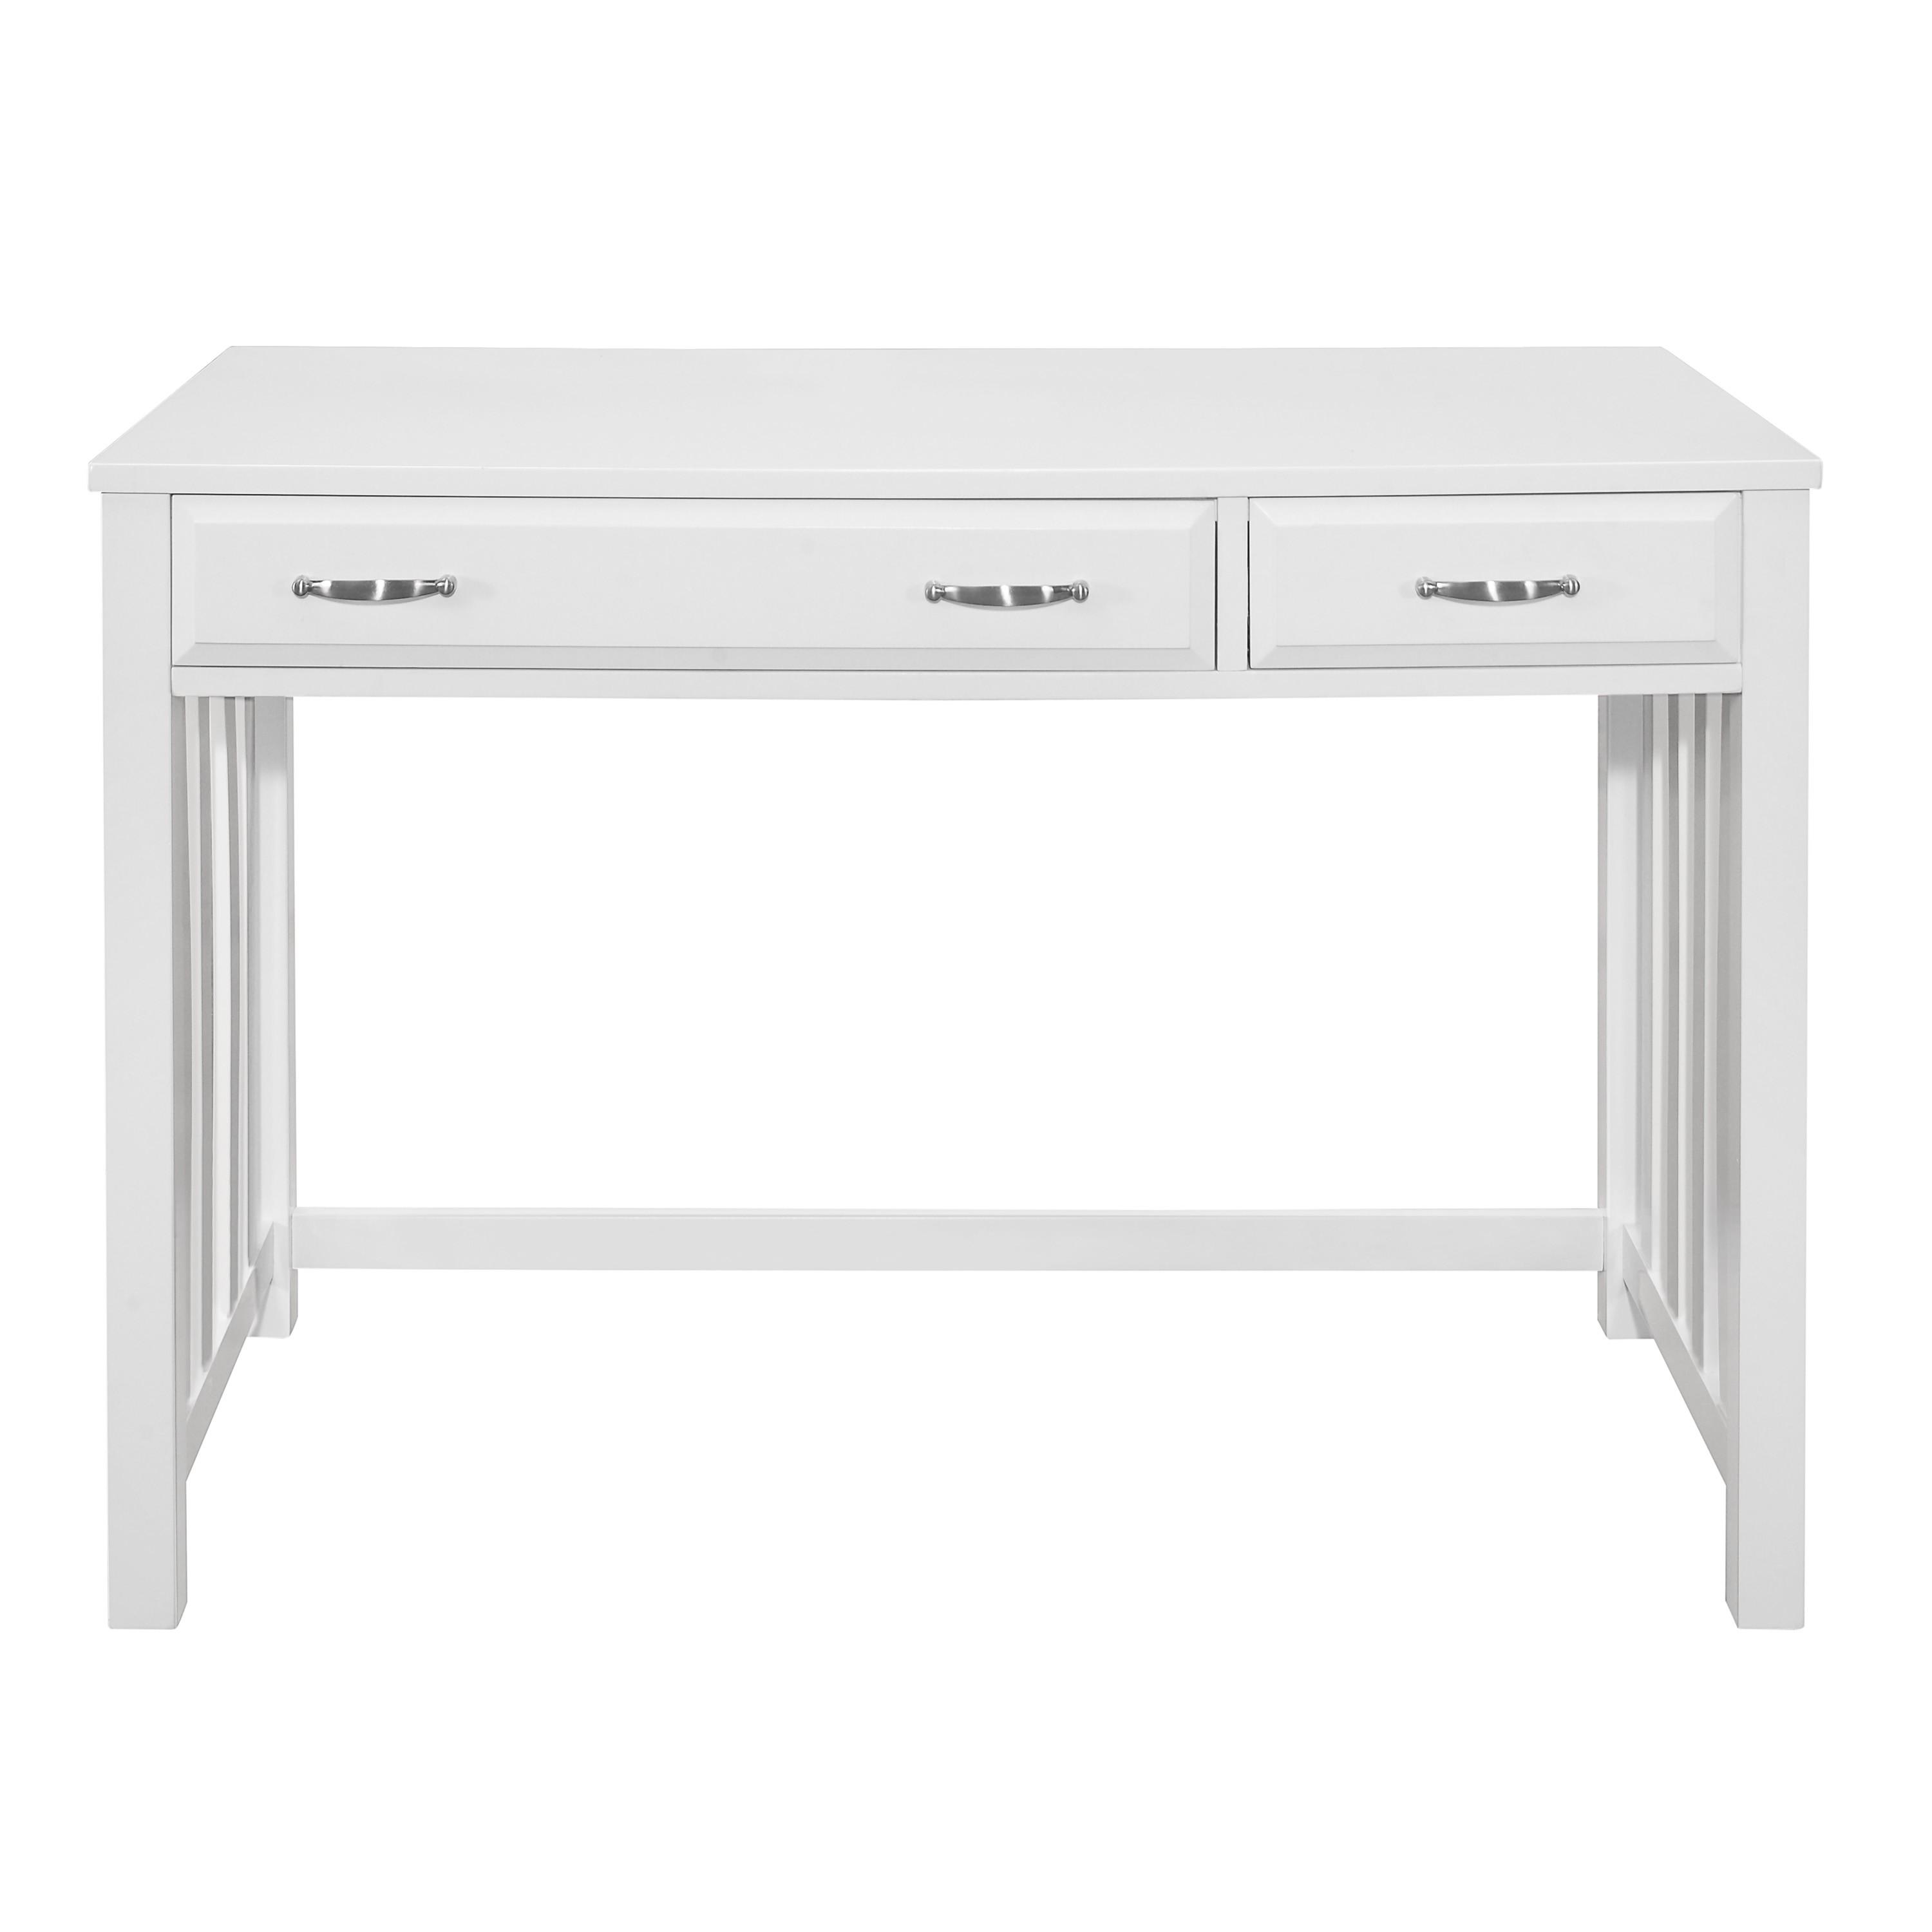 Transitional Desk 4522WH-15 Blanche 4522WH-15 in White 